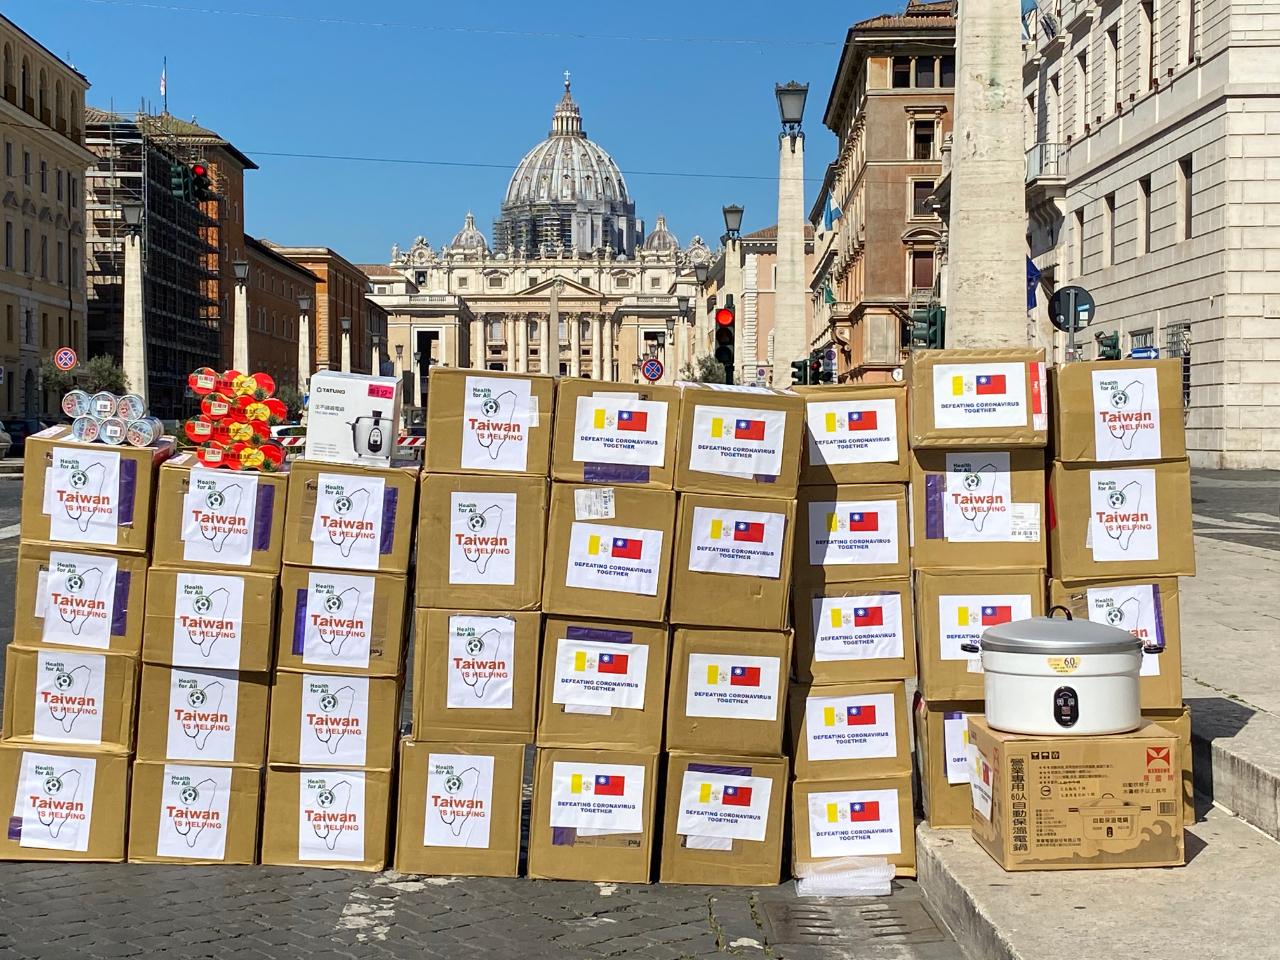 Taiwan on April 27, 2020, donated three rice cookers and canned food products to the Holy See in response to Pope Francis' call to help those in Vatican City affected by the COVID-19 pandemic.